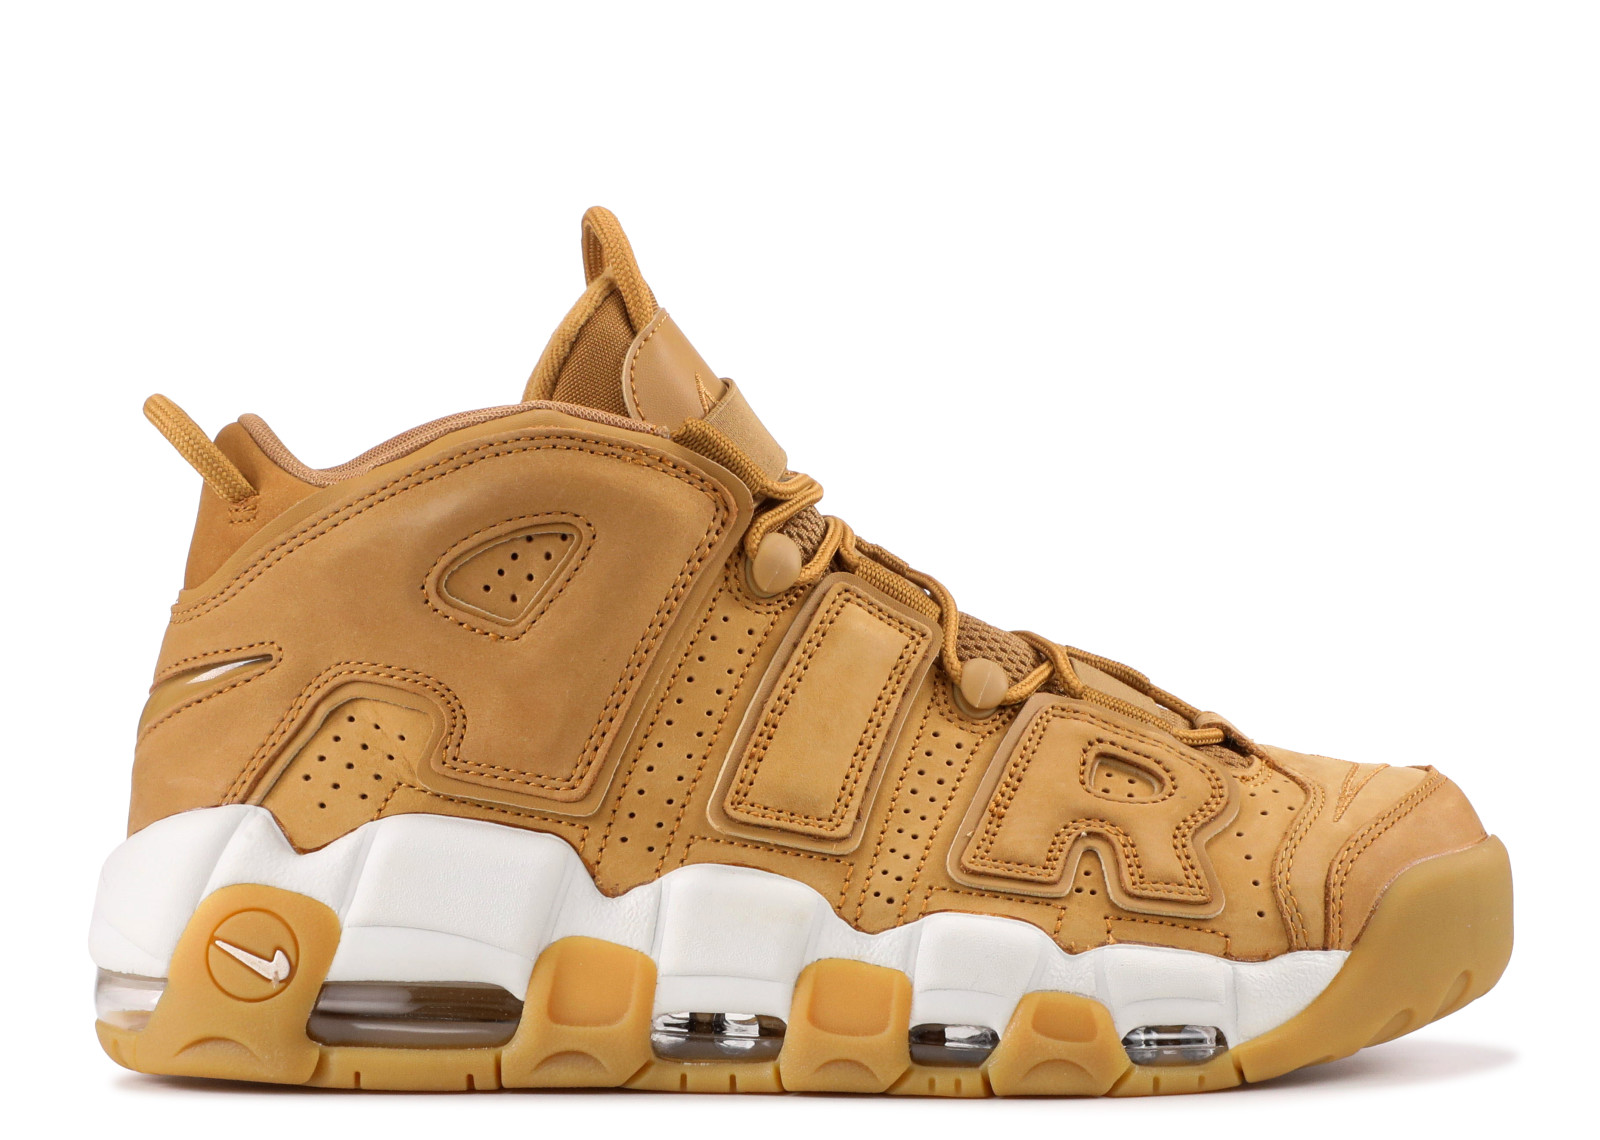 perrito cheque etiqueta 200 - nike air zoom structure 23 mens running shoe green - Nike Air More  Uptempo Basketball Unisex dolce Shoes Brown White AA4060 - StclaircomoShops